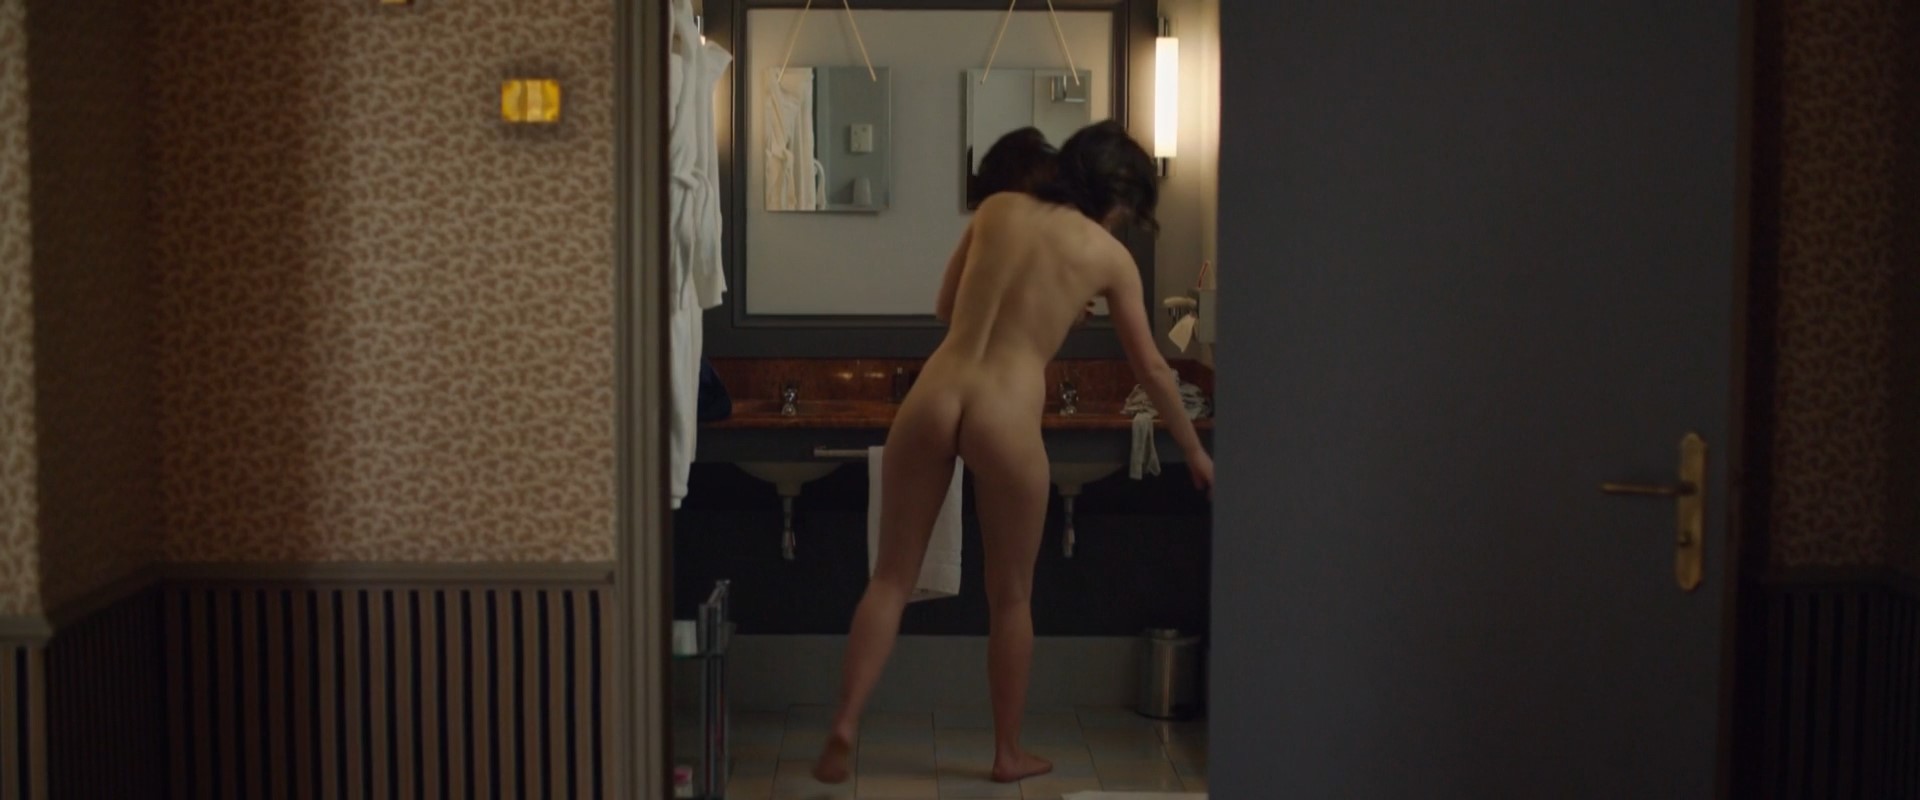 Naked adгёle exarchopoulos Adele Exarchopoulos